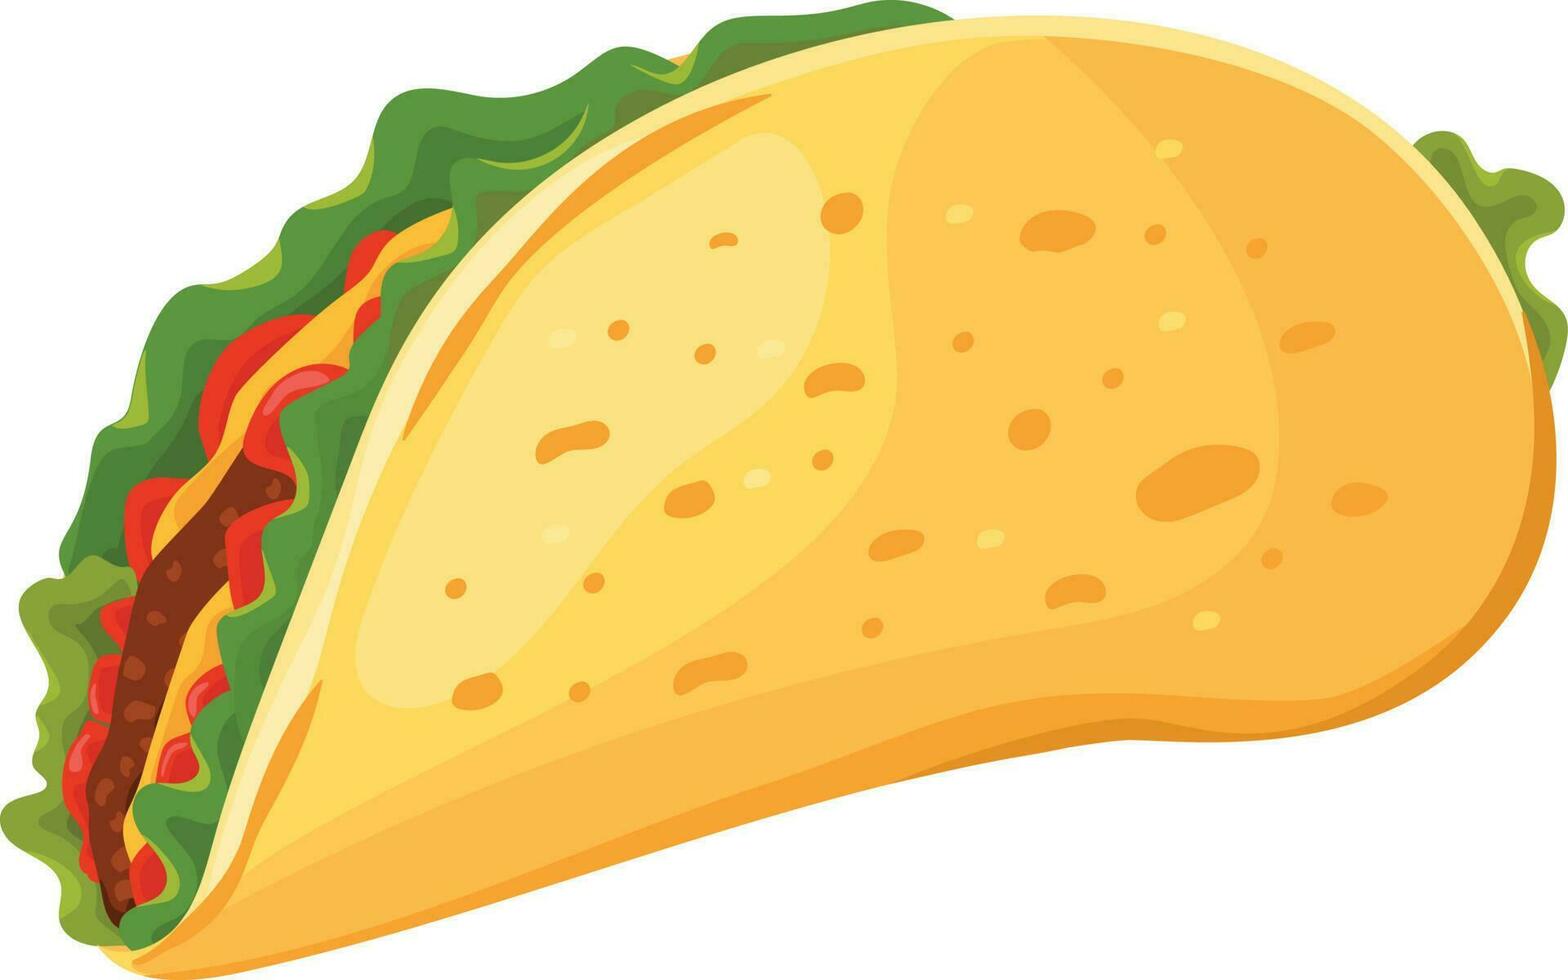 Fast food meal, pita with meat and sauce vector